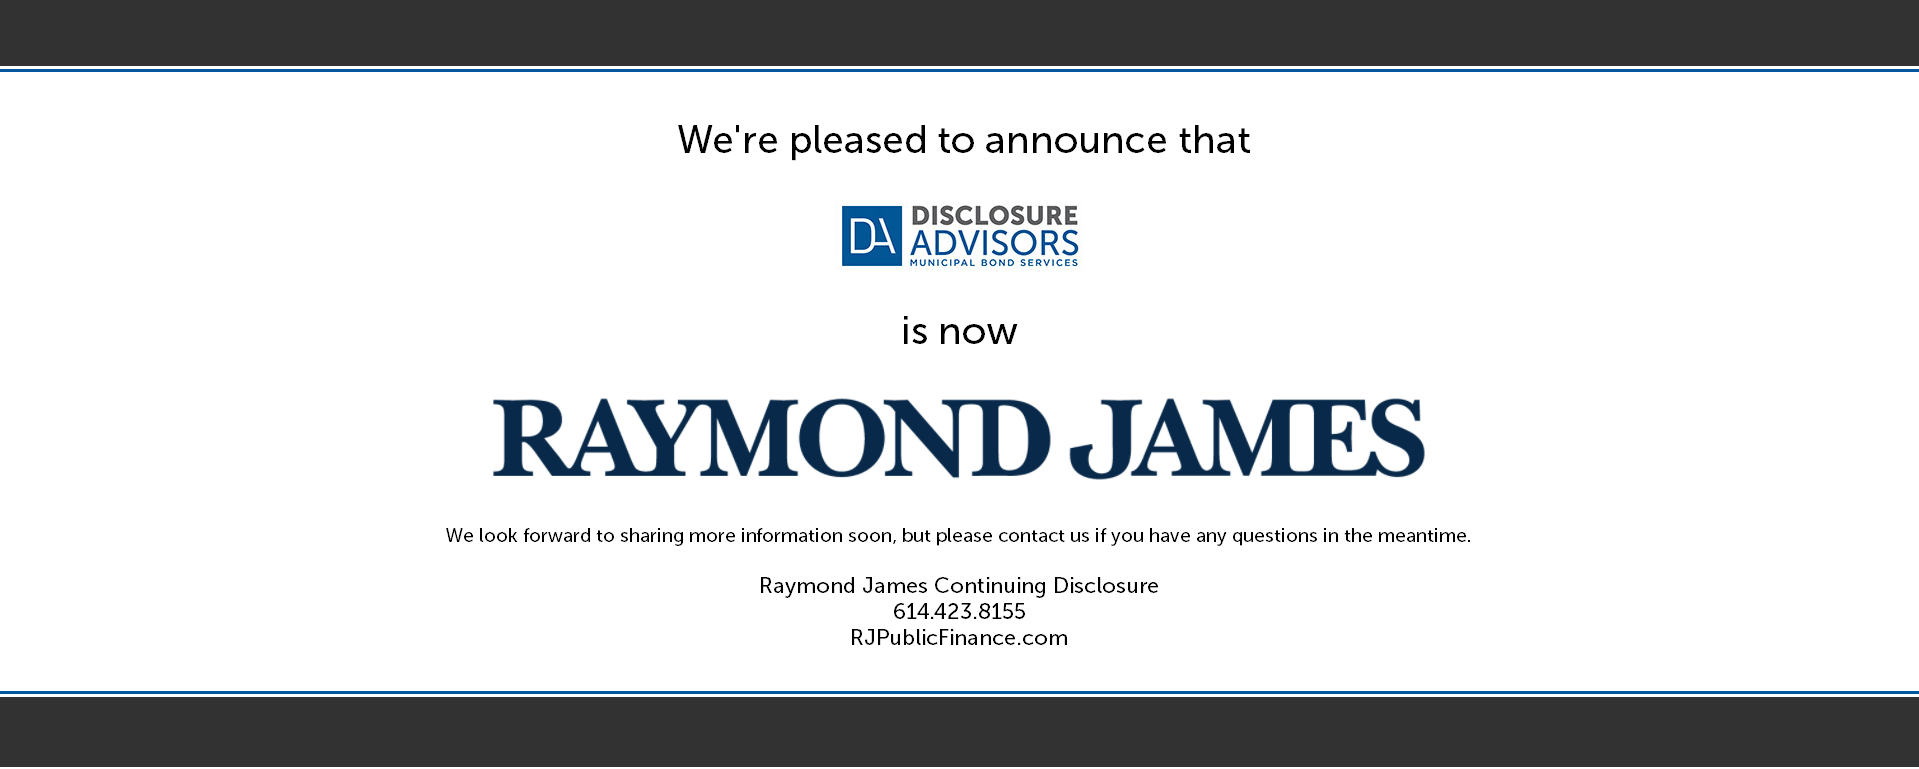 Disclosure Advisors is now Raymond James Continuing Disclosure